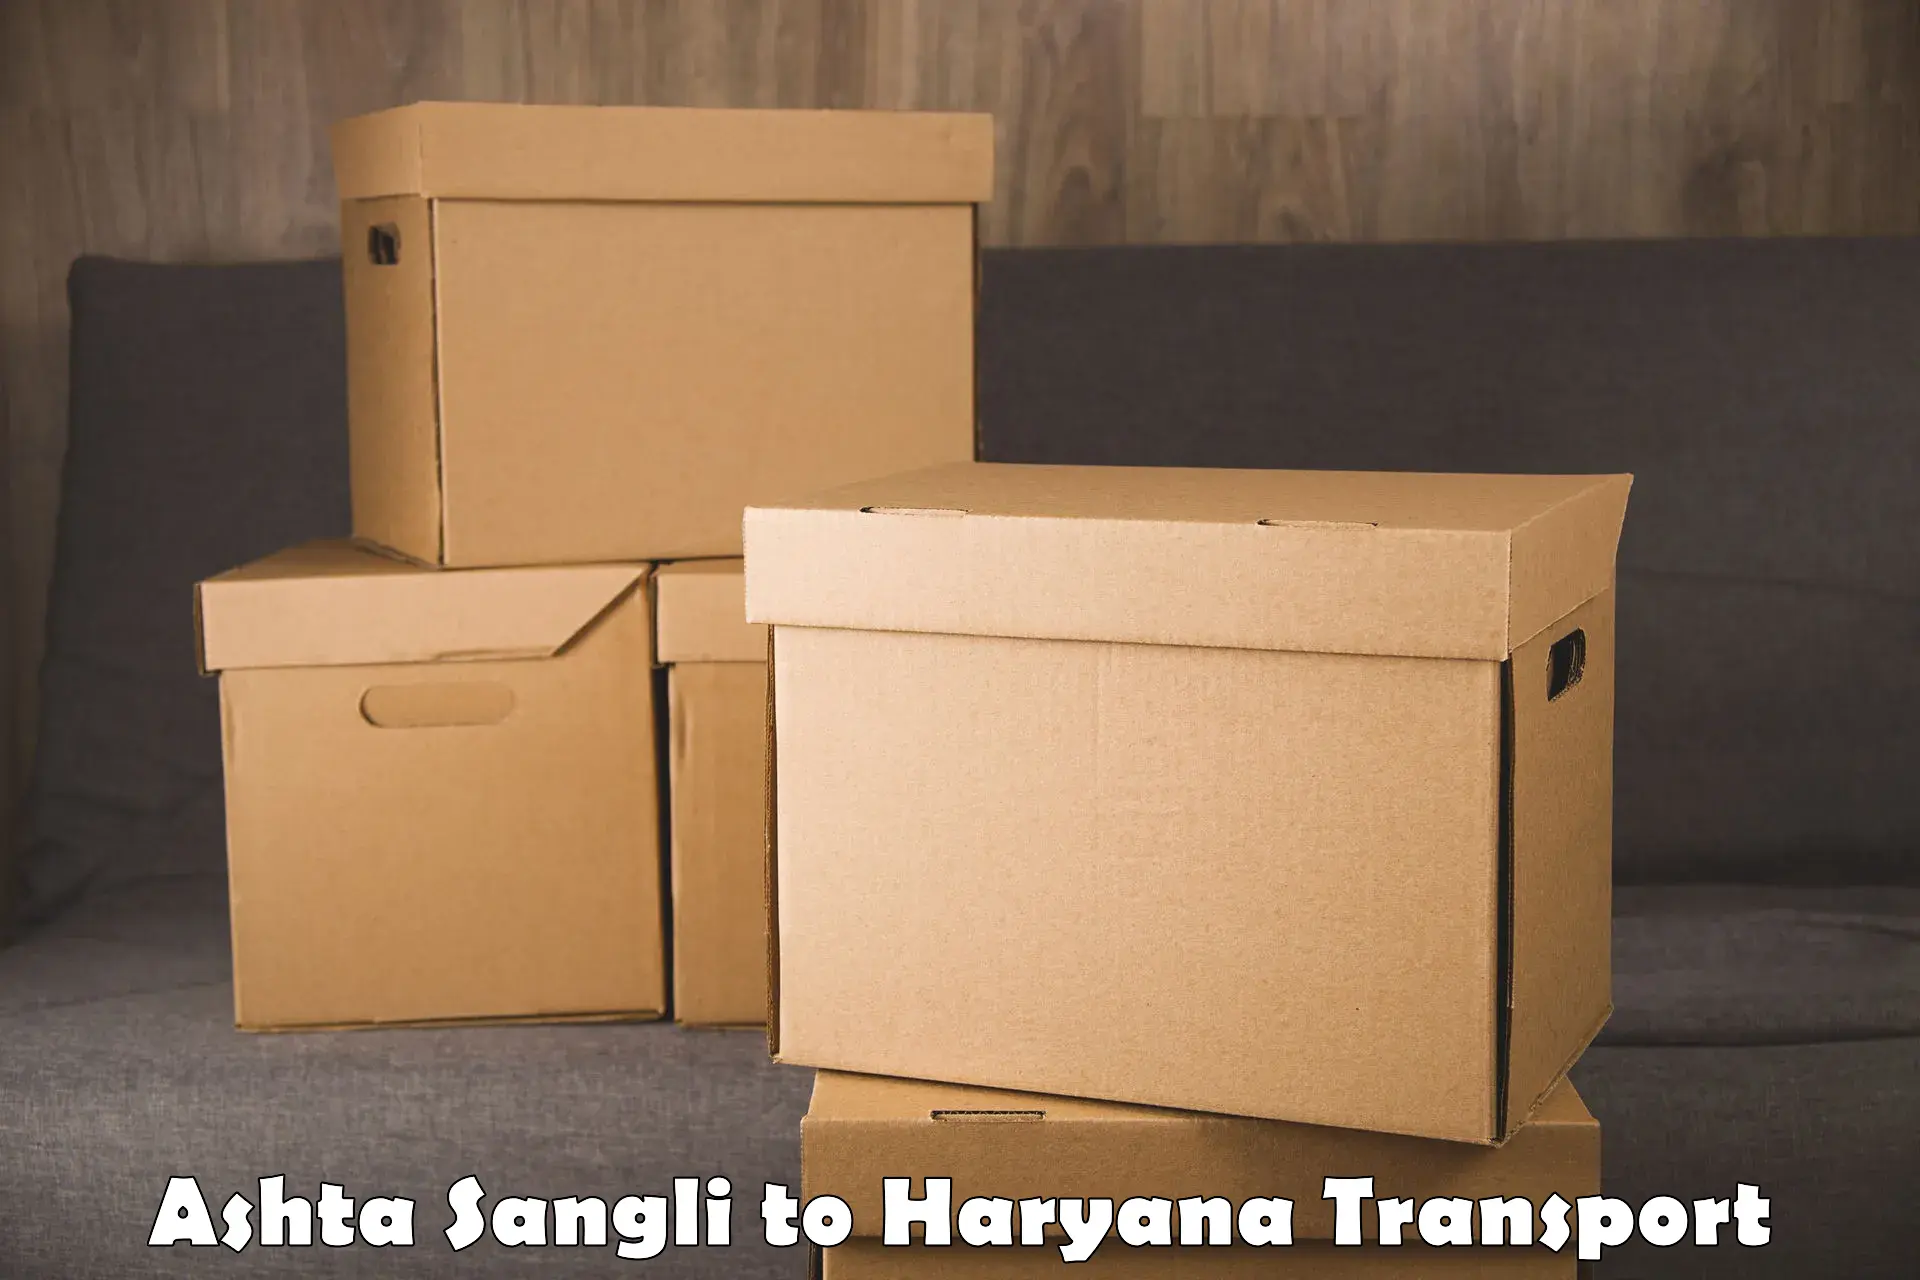 Transport bike from one state to another Ashta Sangli to NCR Haryana